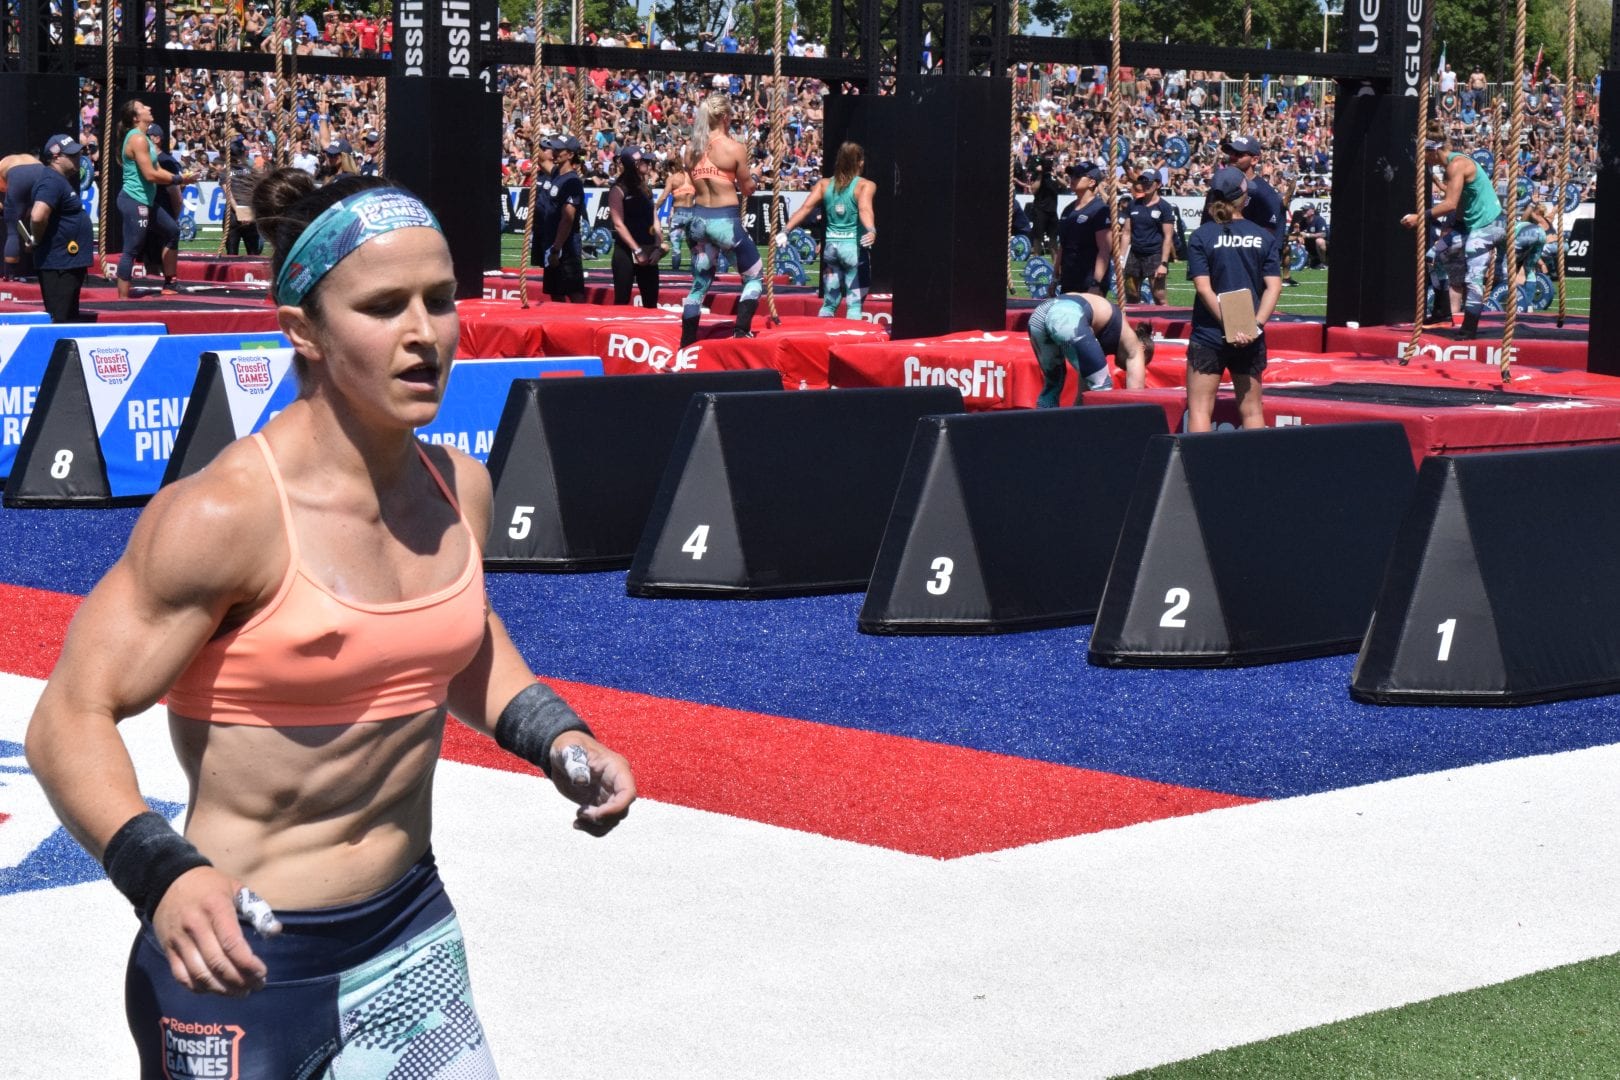 Kari Pearce completes a run before legless rope climbs at the 2019 CrossFit Games